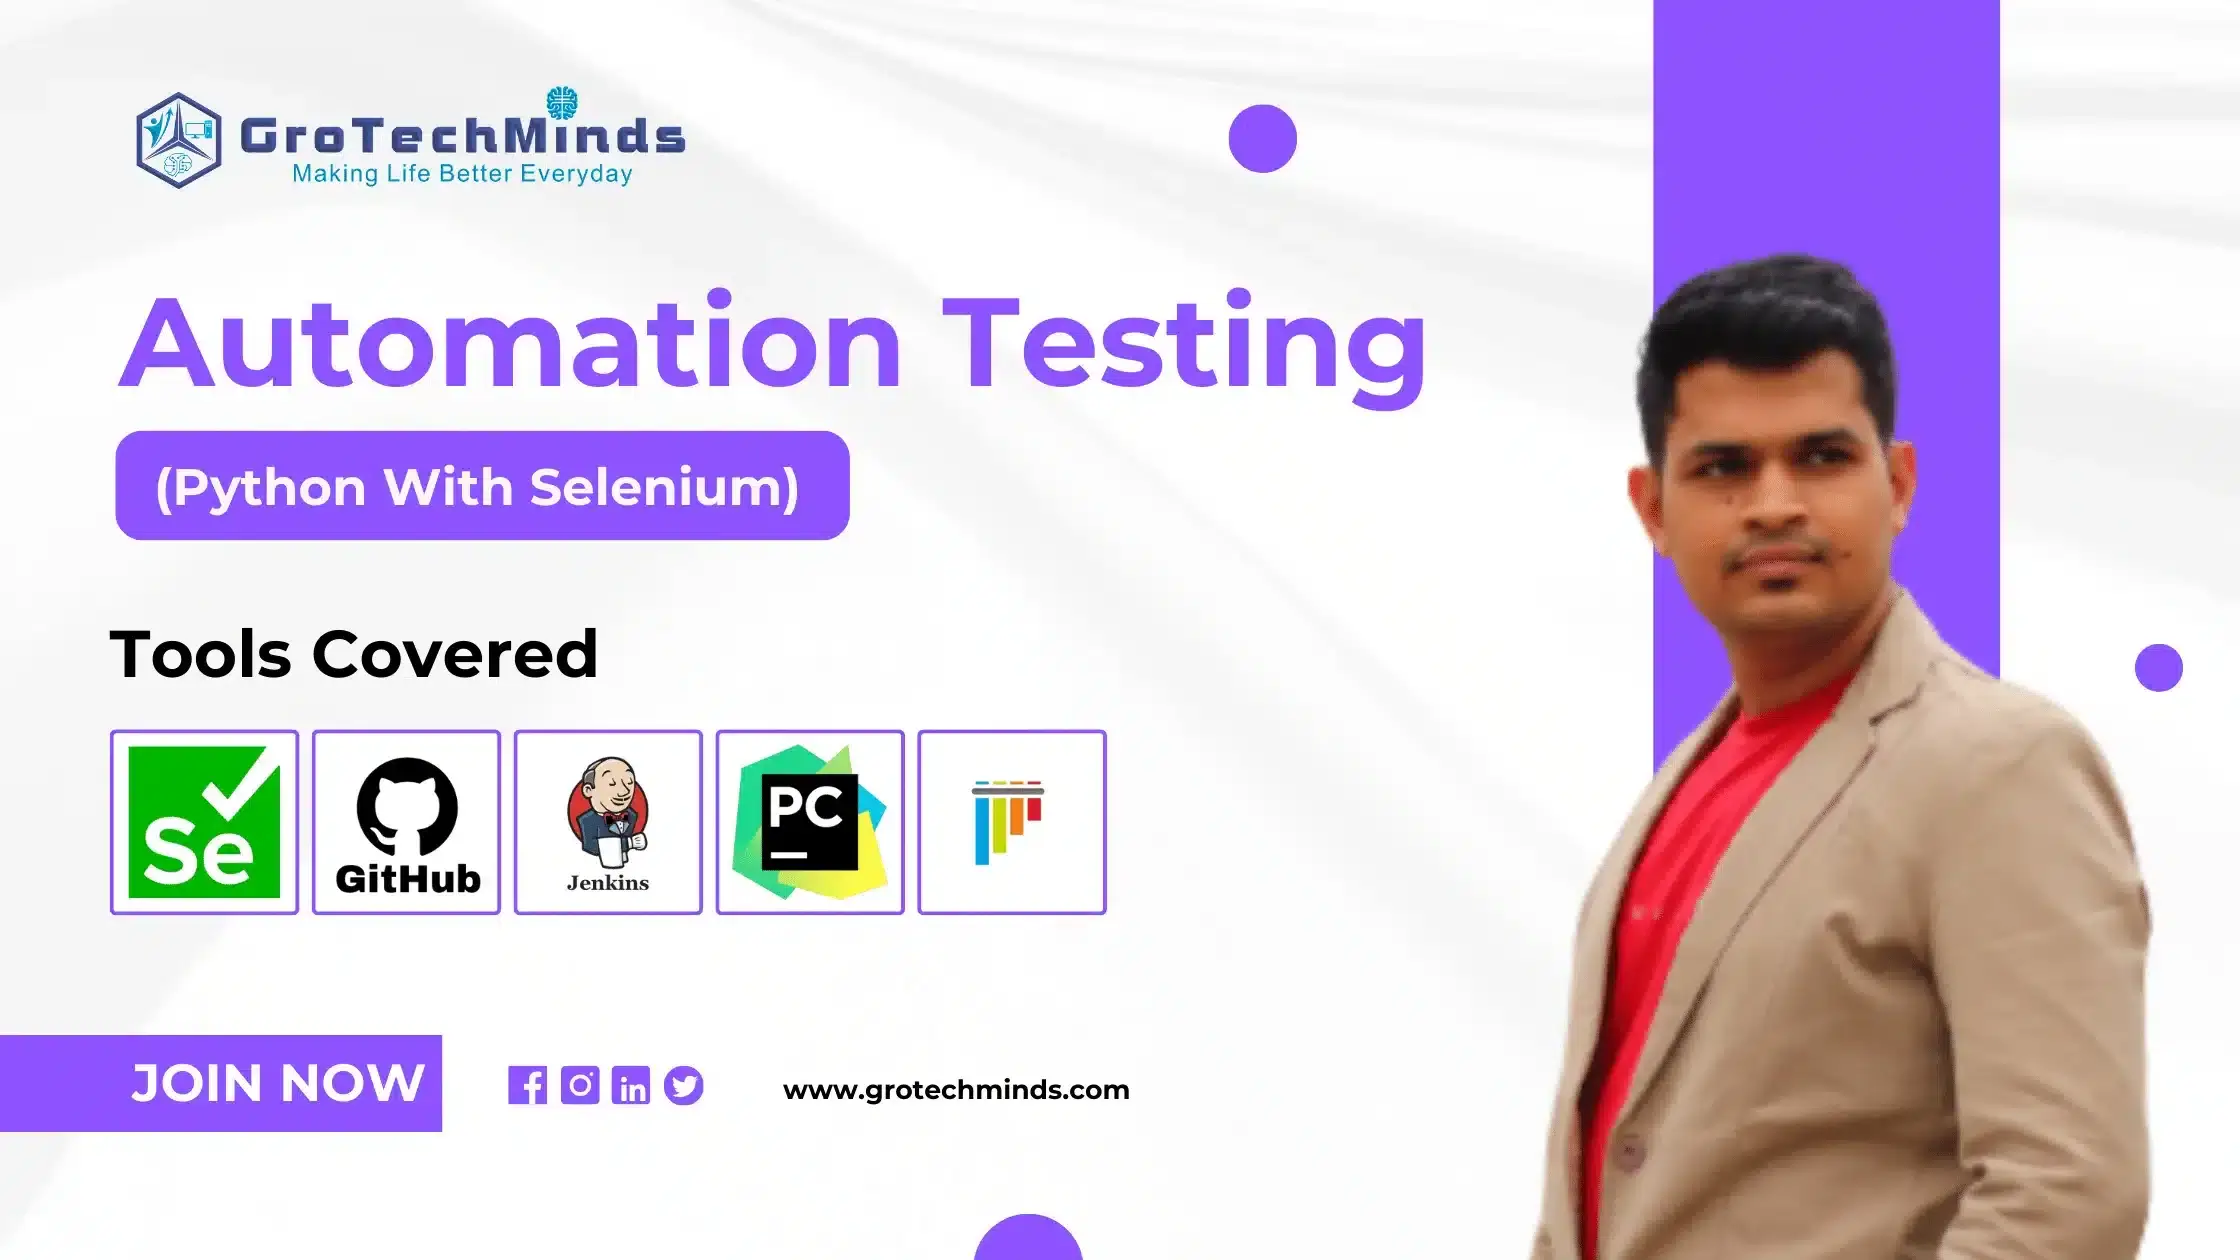 Automation Testing With Python And Selenium Course